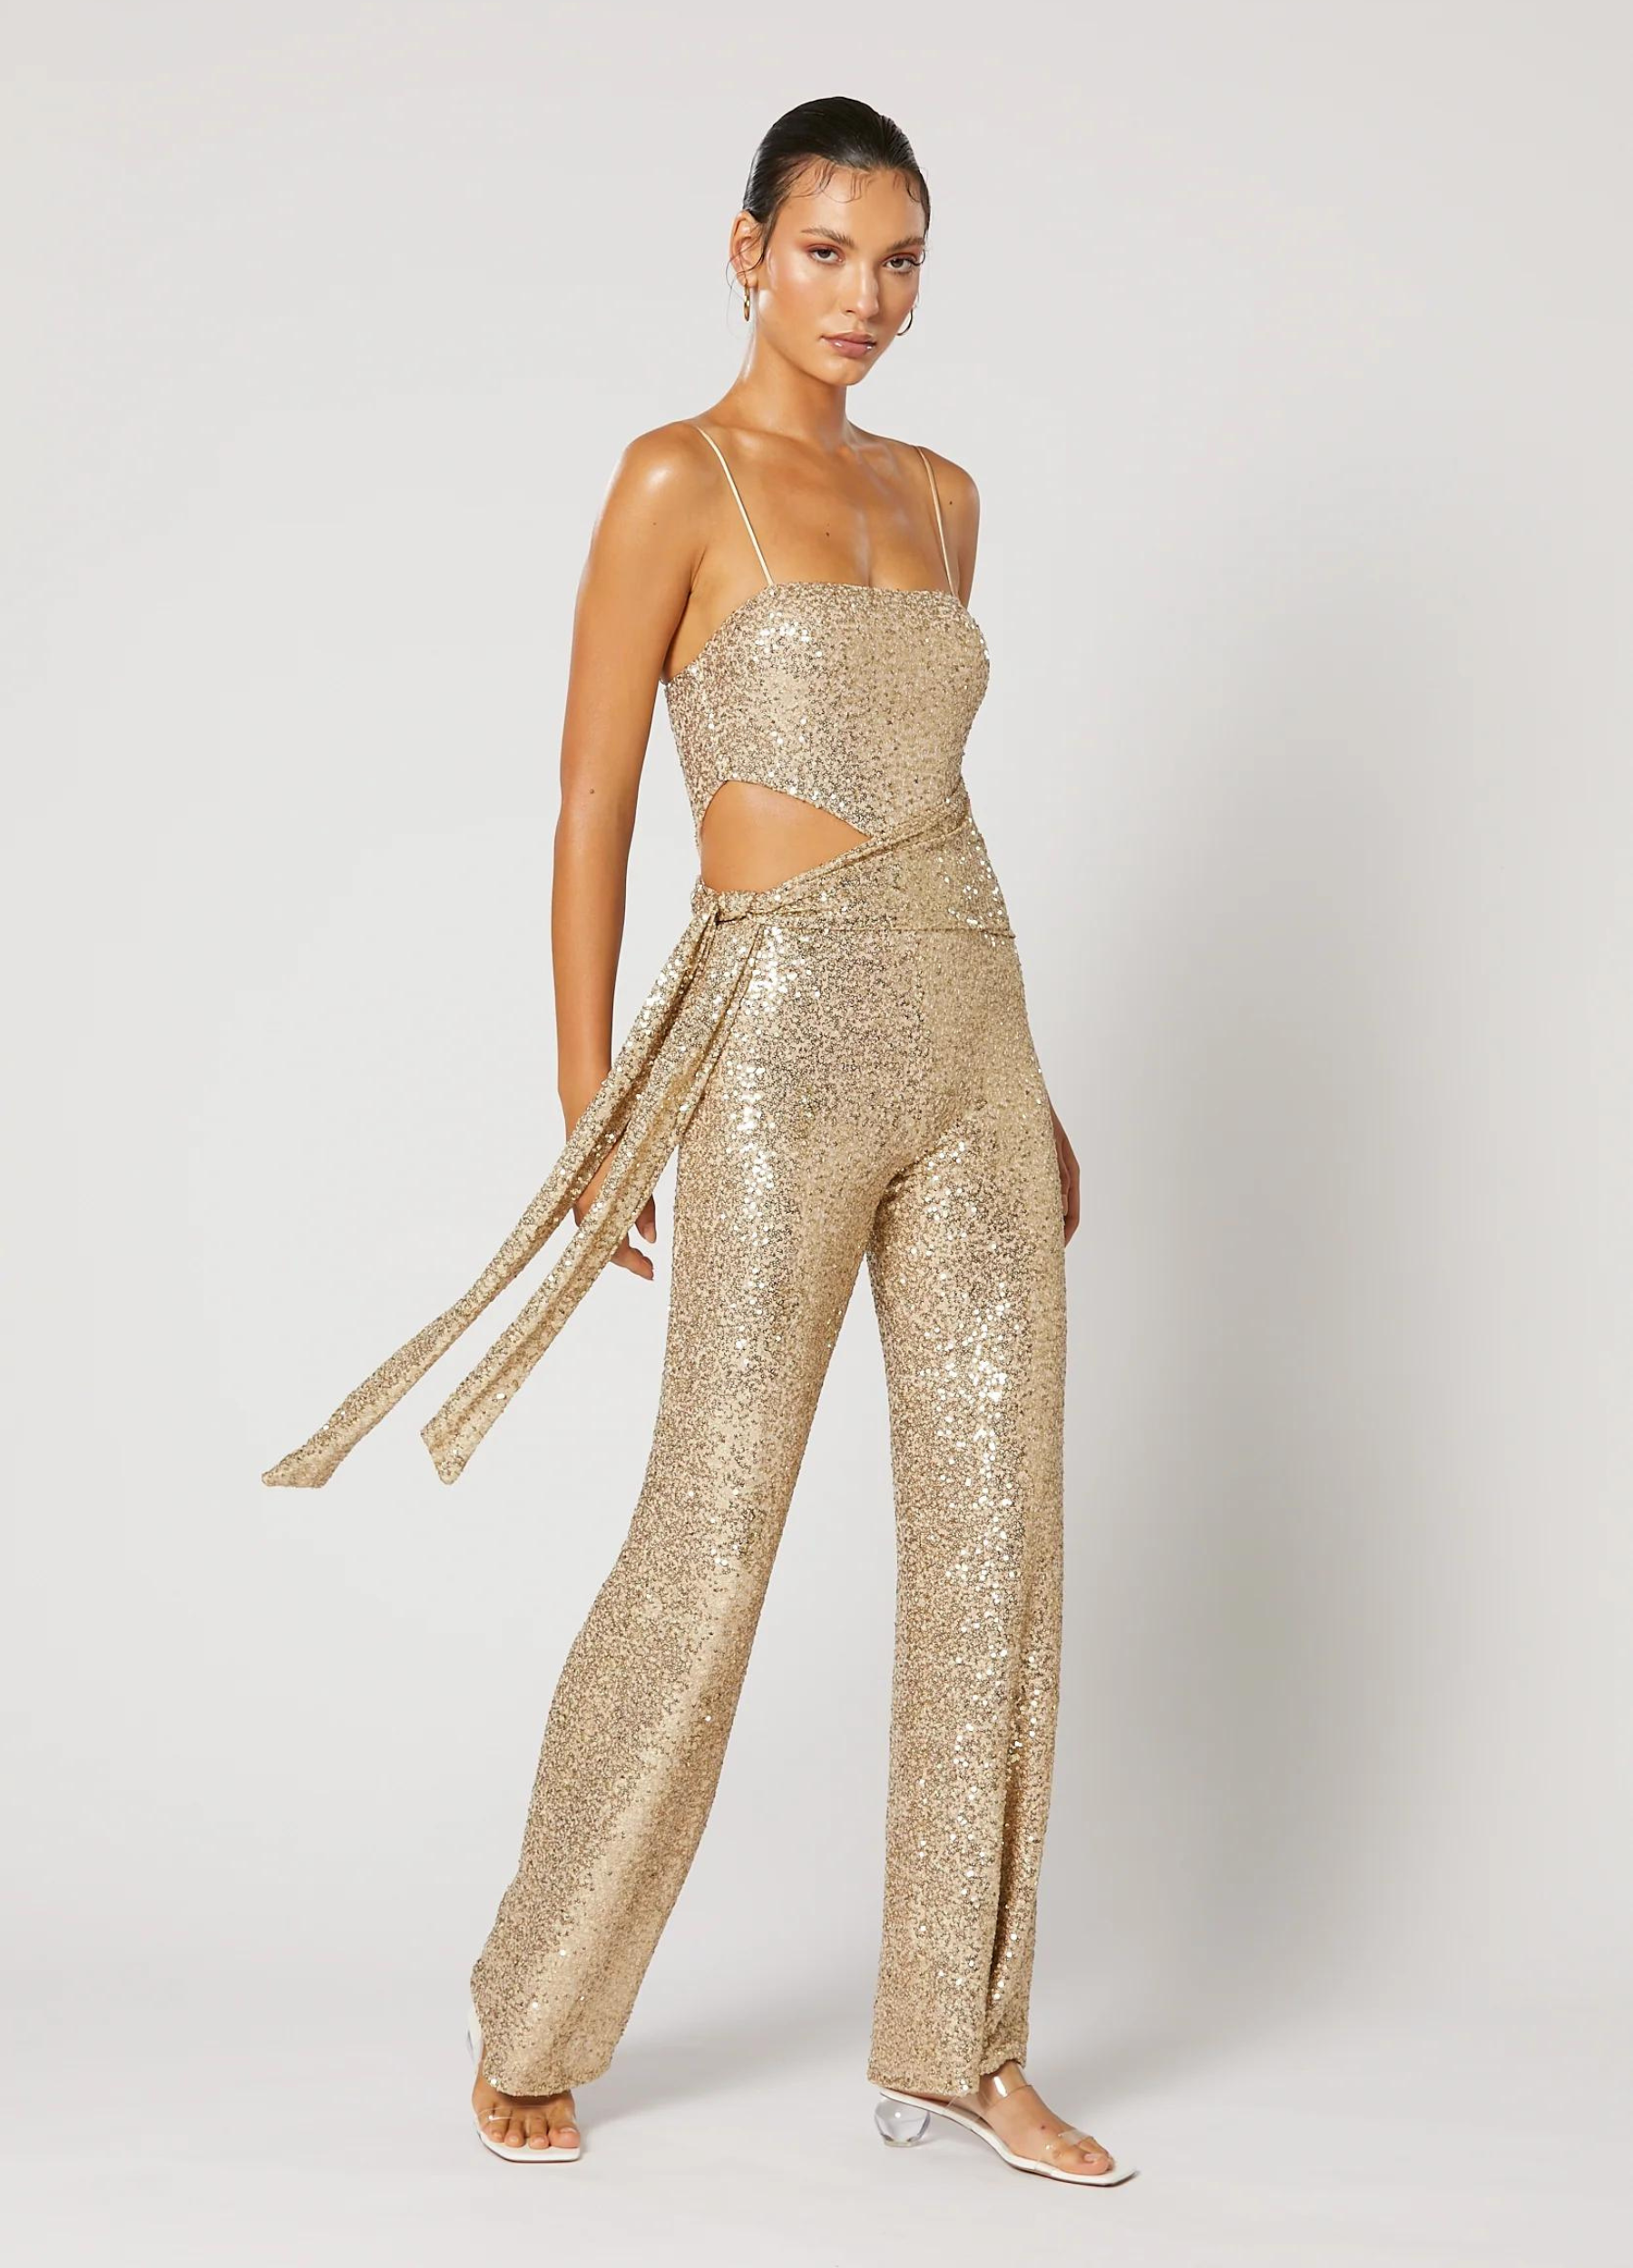 Strappy Sequin Gold Jumpsuit with cut out and sash tie perfect for your next event